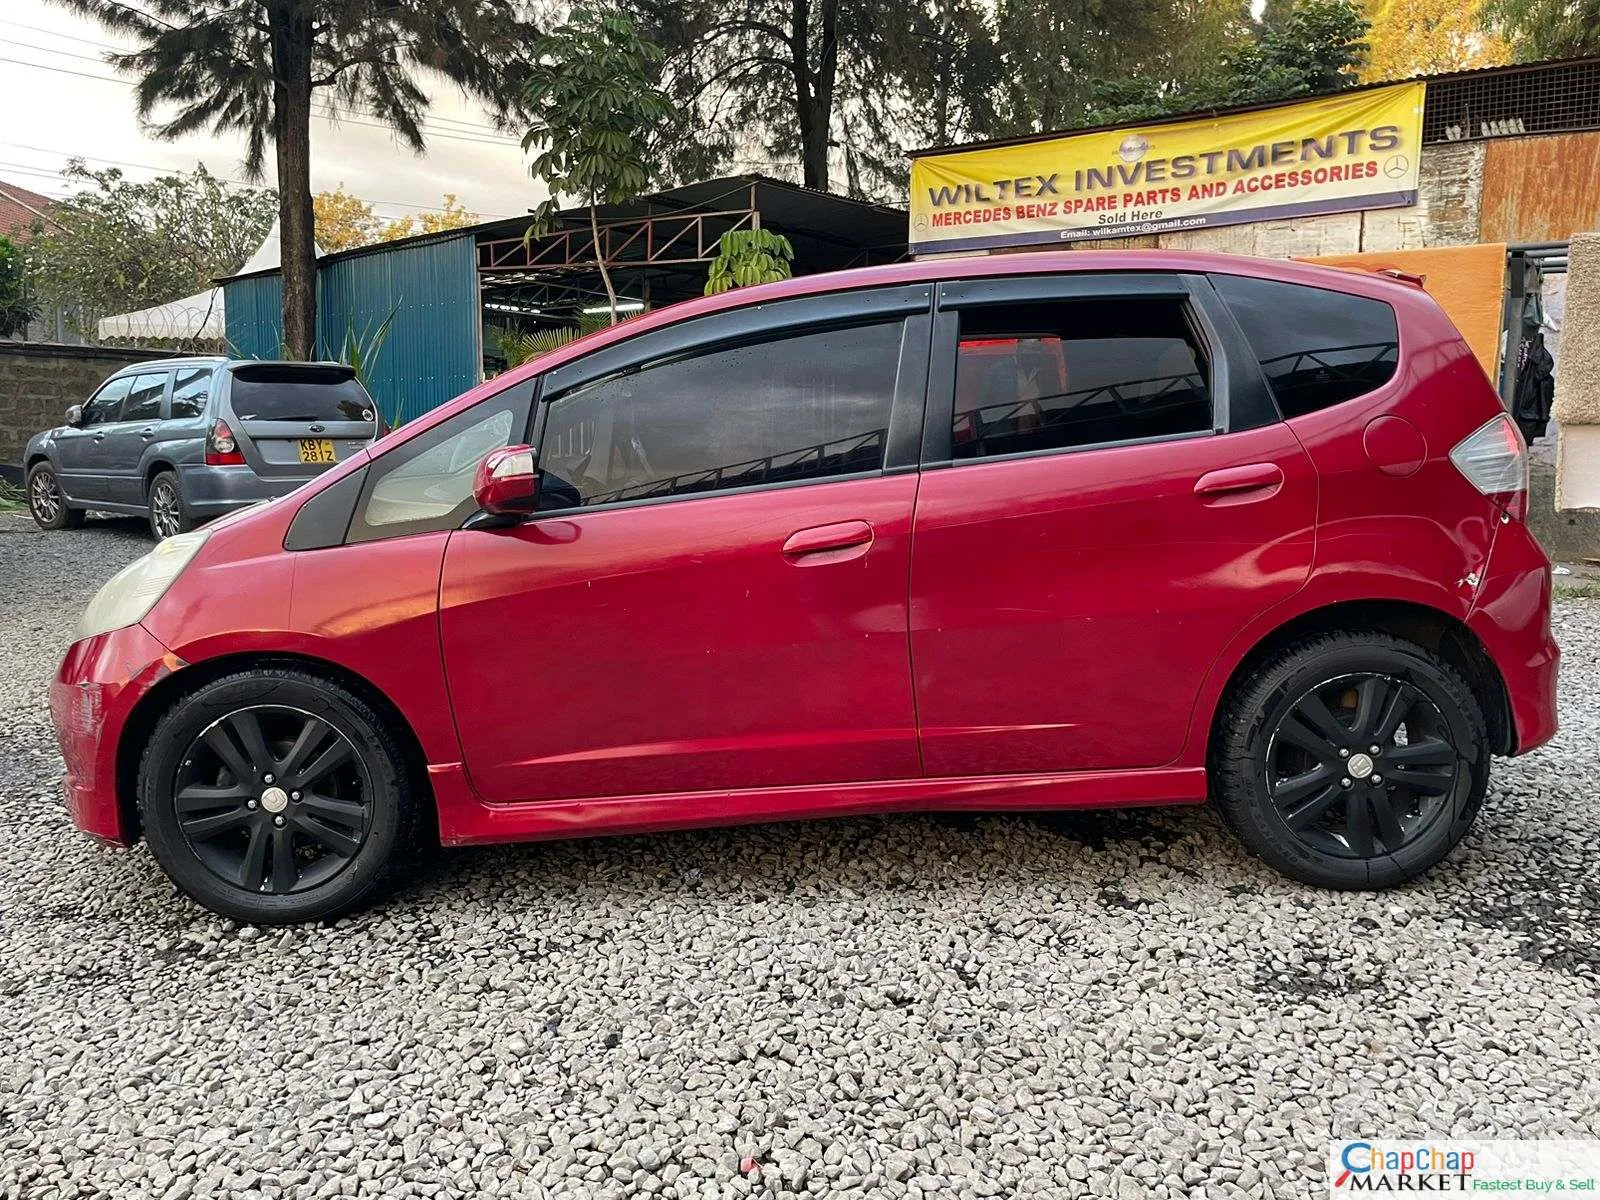 Cars Cars For Sale/Vehicles-Honda fit RS 🔥 QUICK SALE You Pay 30% Deposit Trade in OK EXCLUSIVE 9